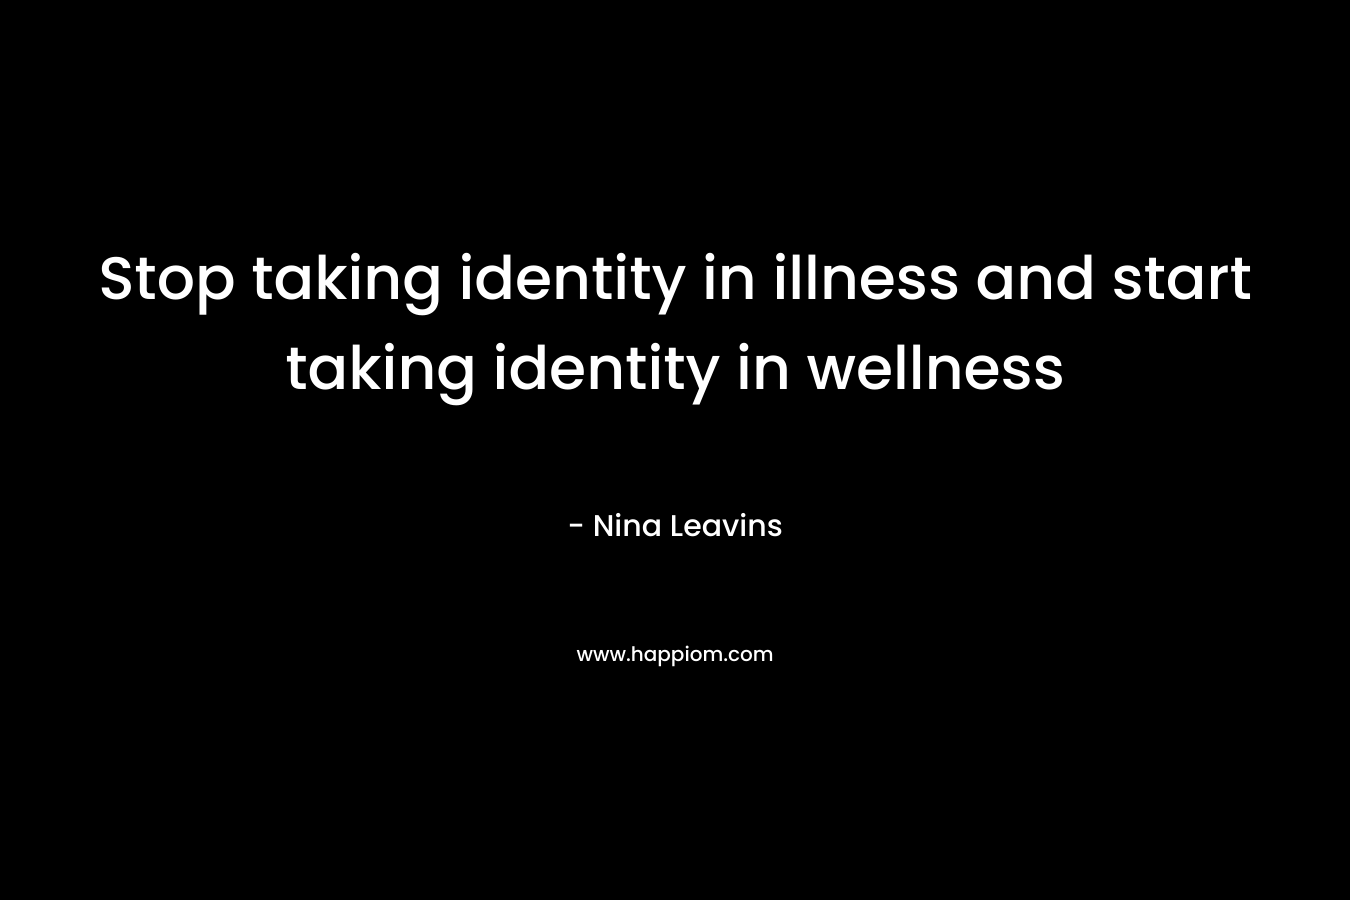 Stop taking identity in illness and start taking identity in wellness